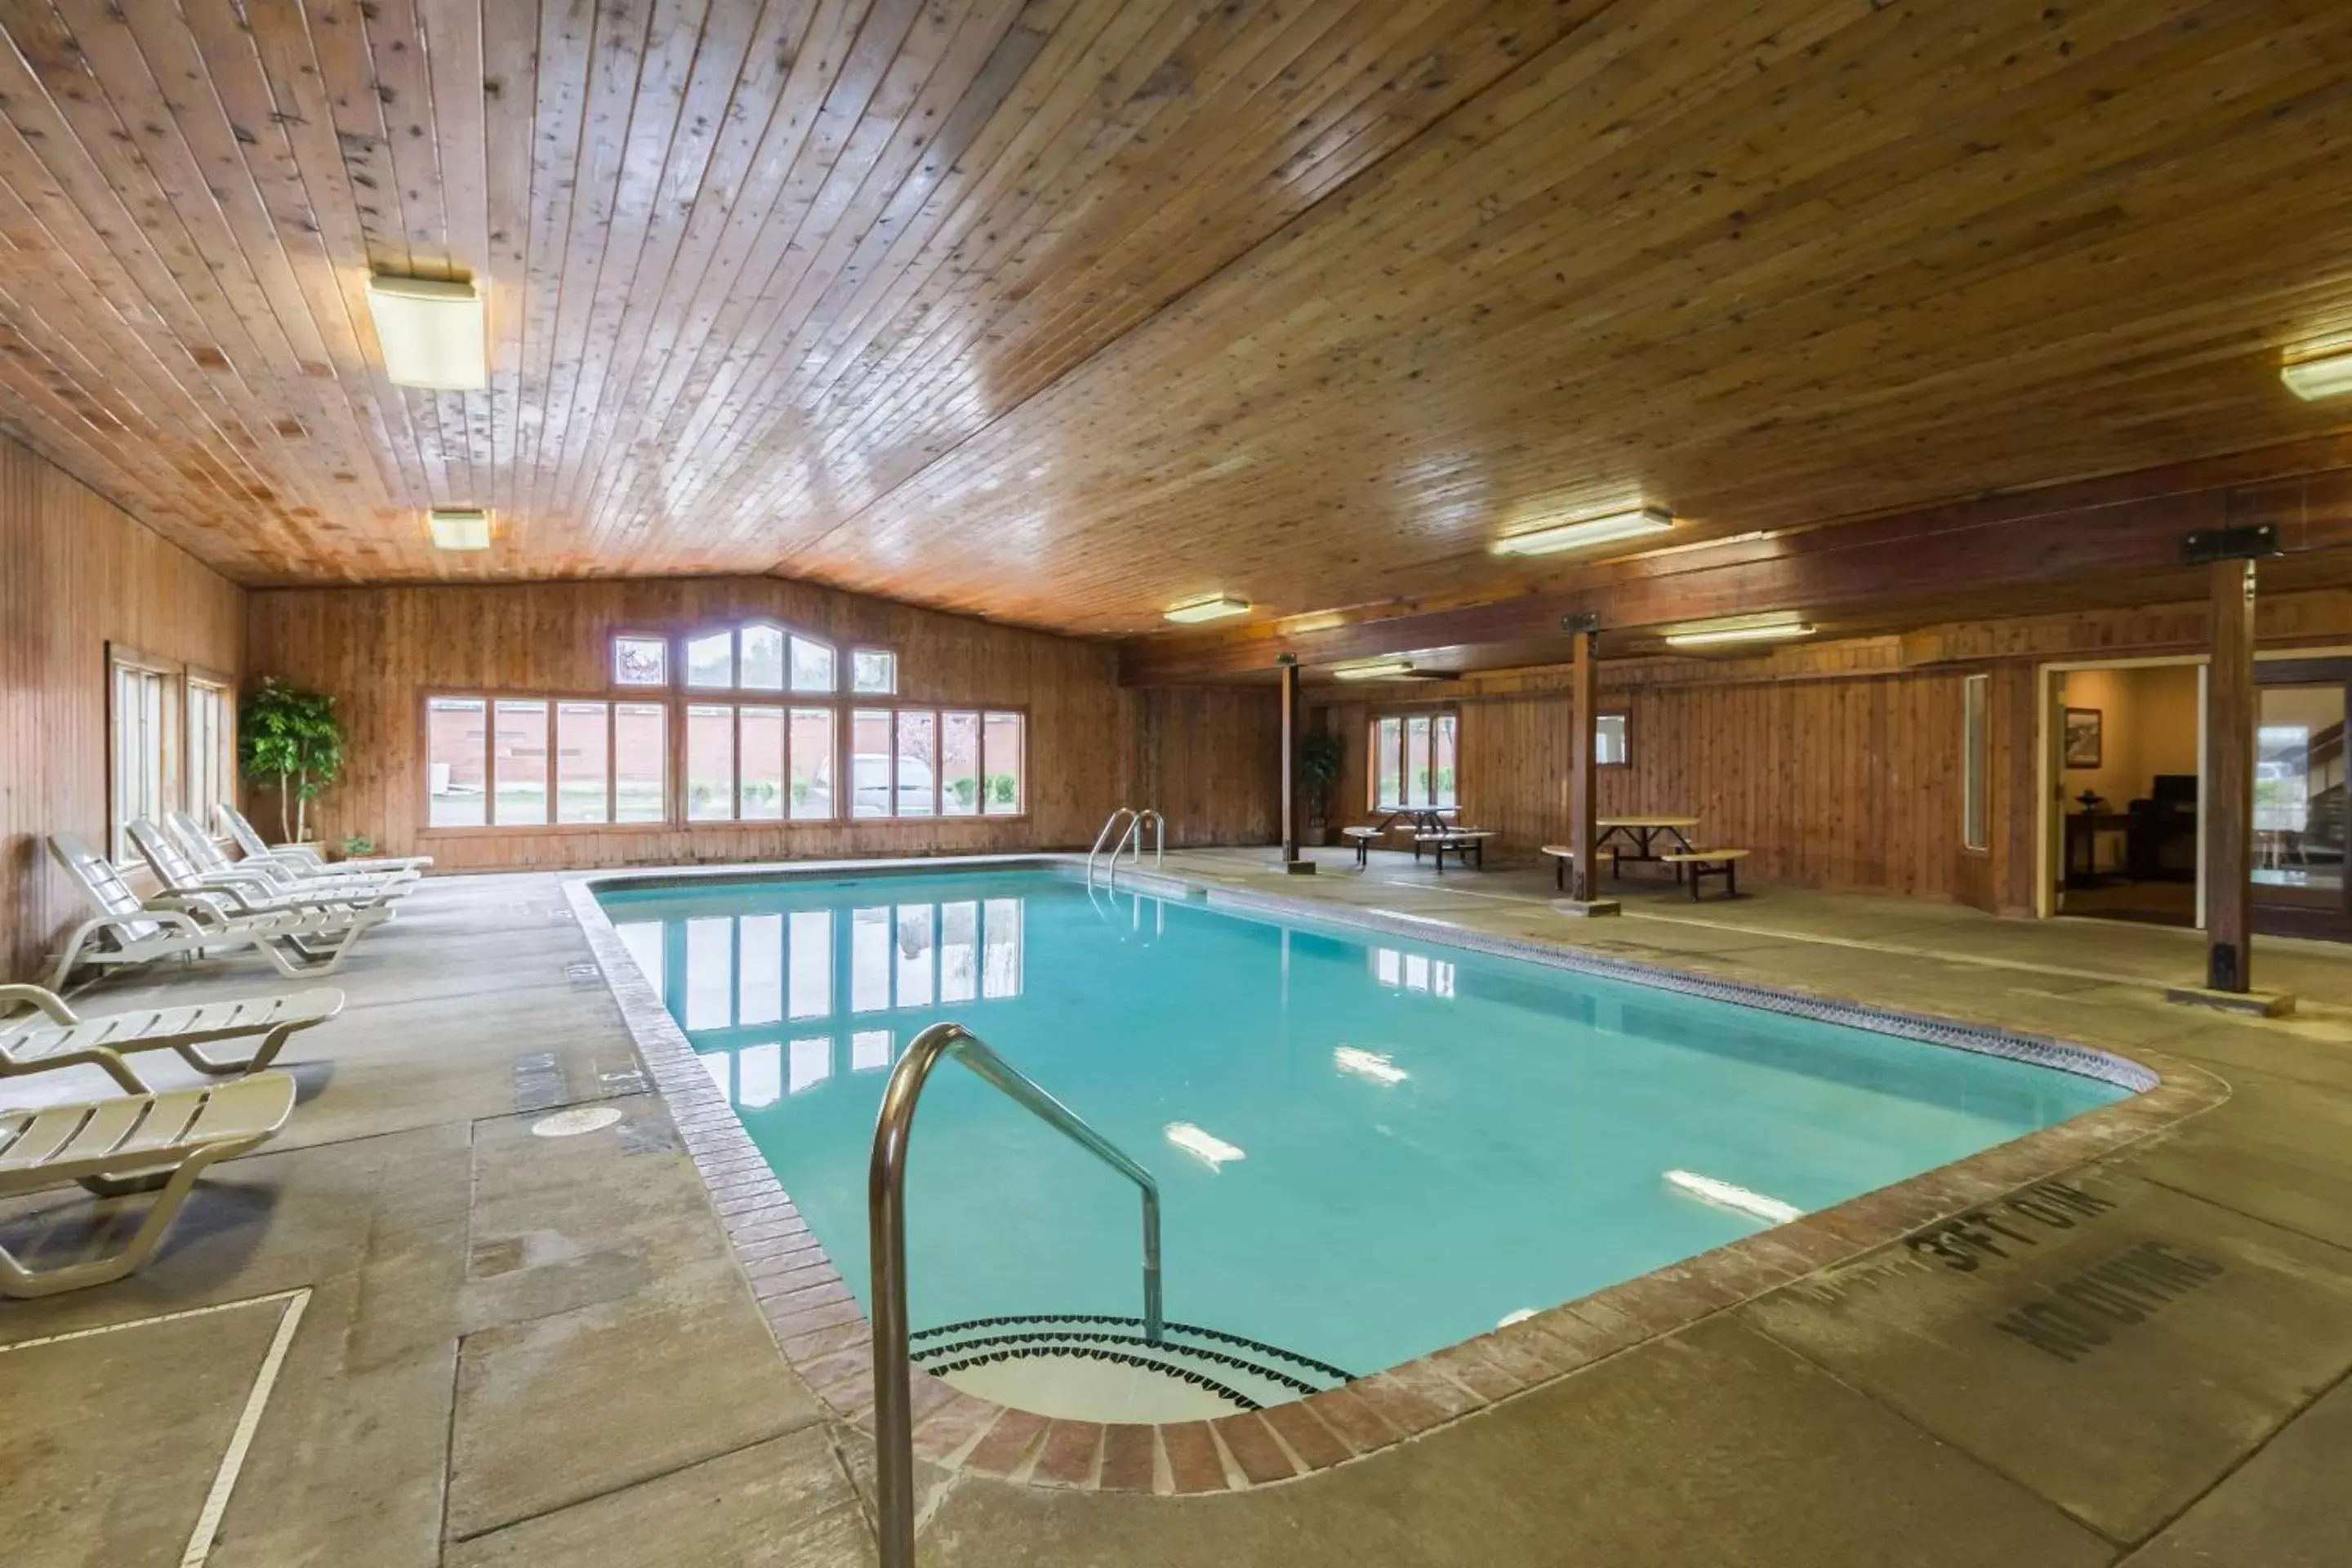 On site, Swimming Pool in Rodeway Inn Red Wing